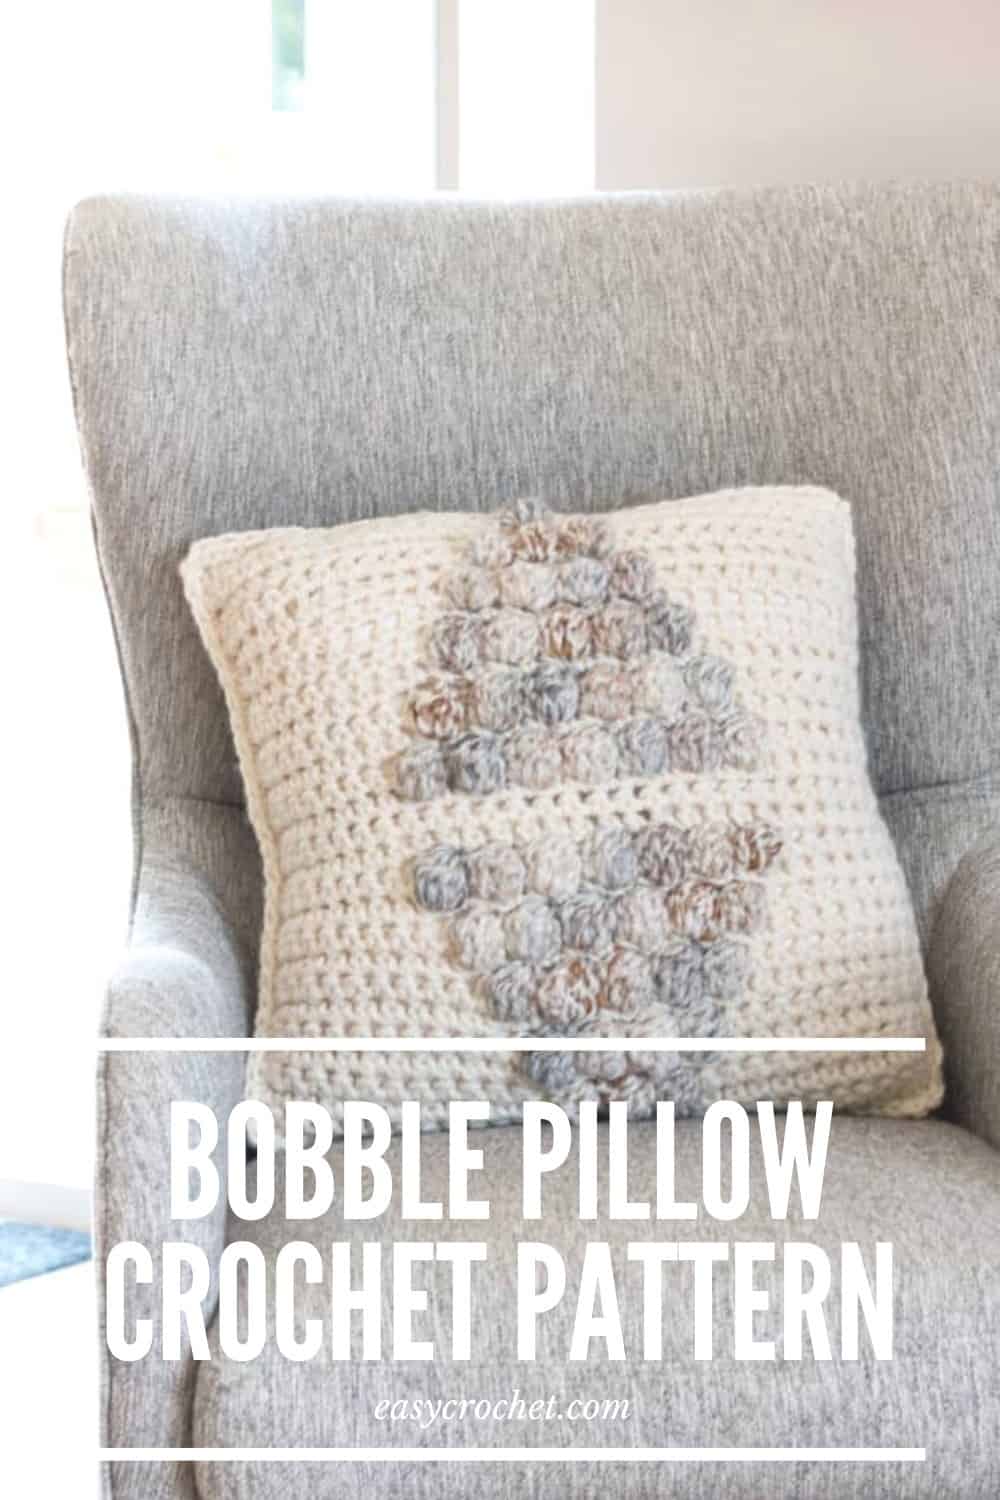 Make this simple Bobble Stitch Pillow Crochet Pattern today using this FREE crochet pillow pattern from Easy Crochet easycrochet.com via @easycrochetcom